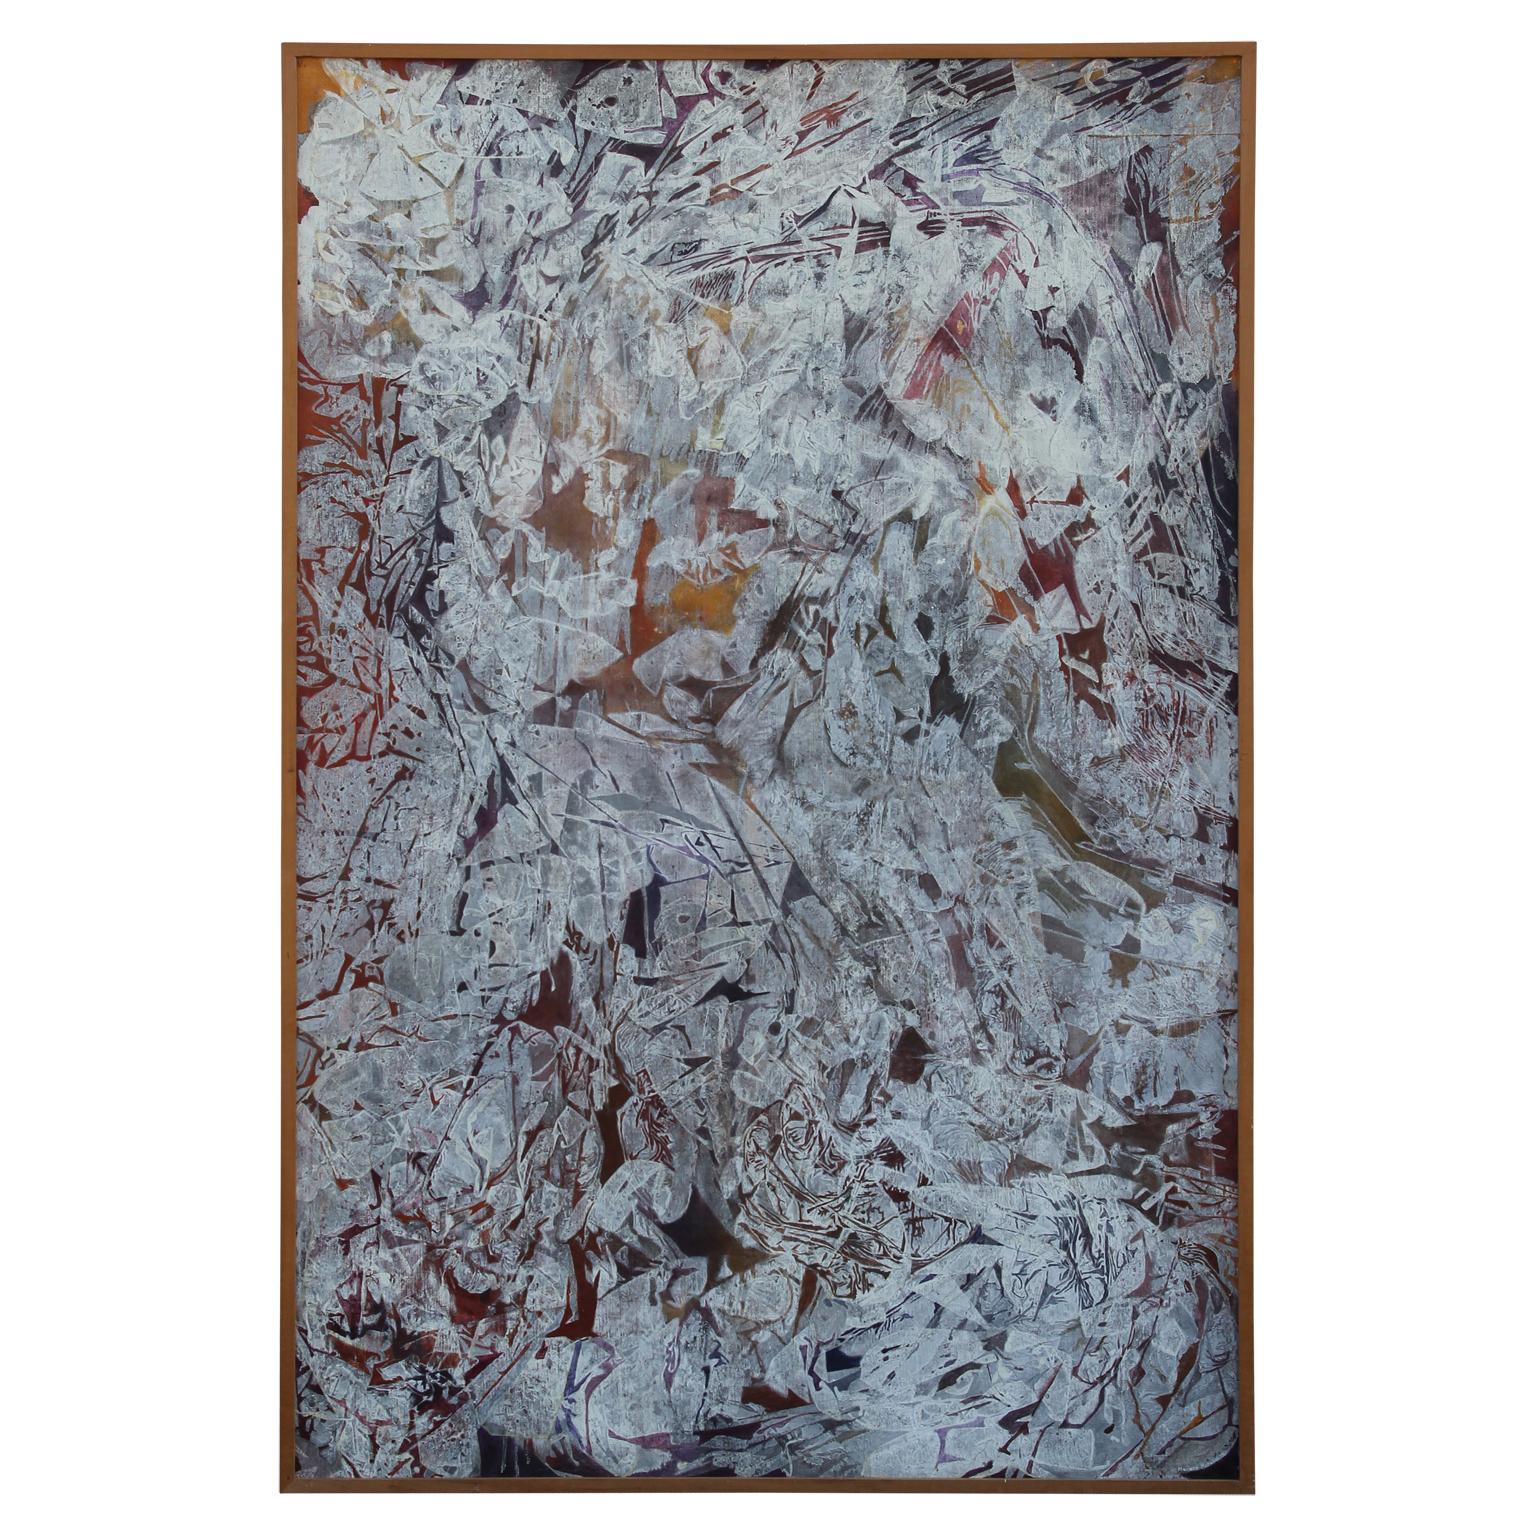 Marlene Matalon Abstract Painting - "White" Large Abstract Expressionist Painting